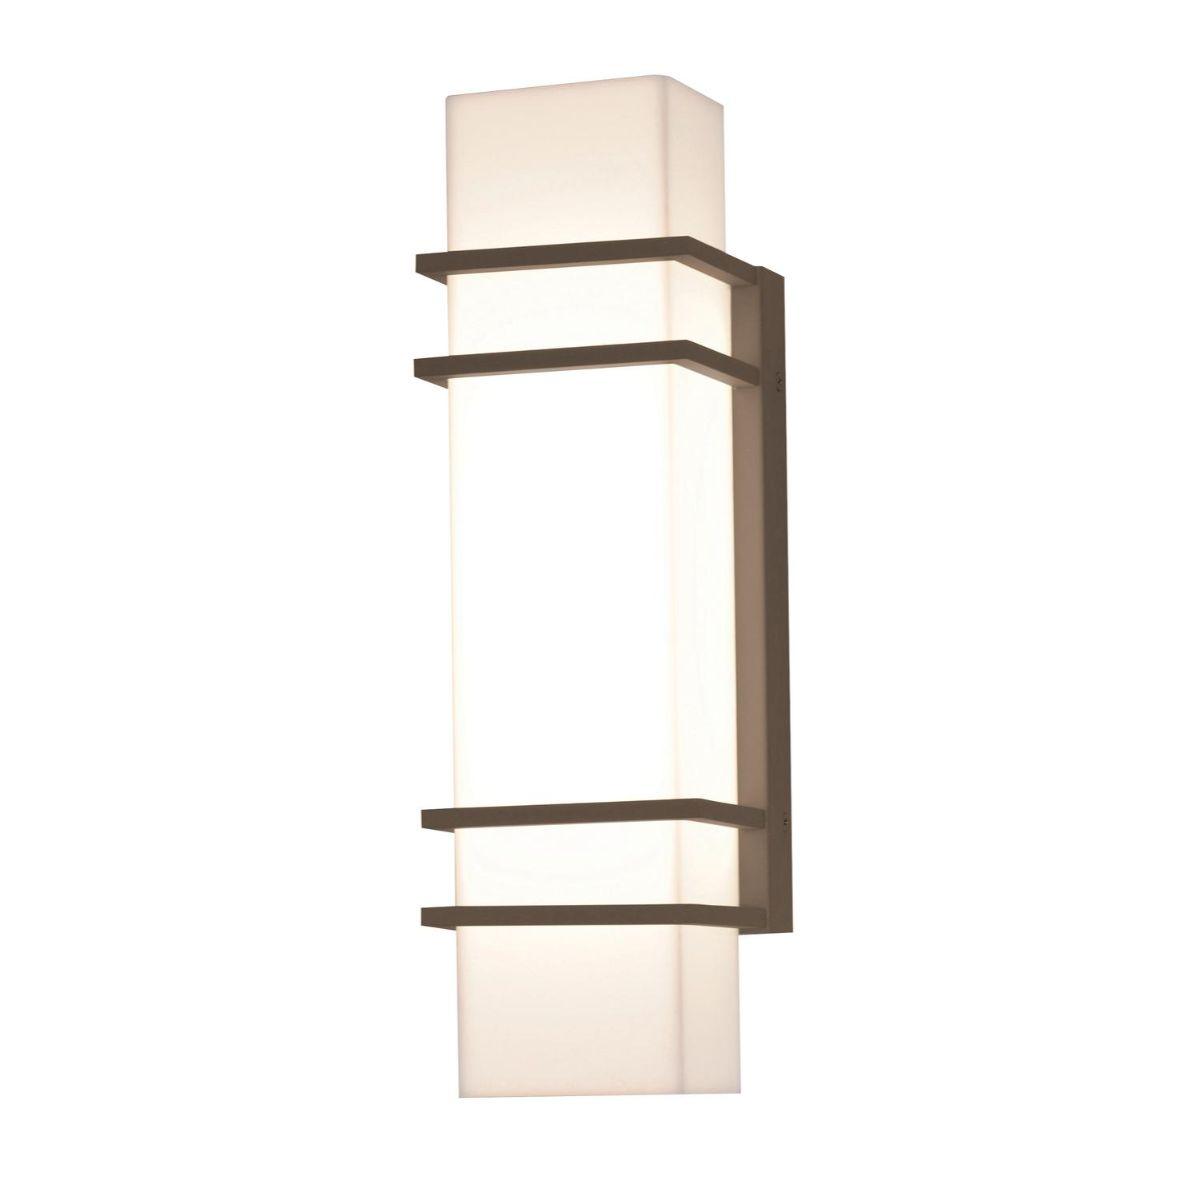 Blaine 16 in. LED Outdoor Wall Sconce 1800 Lumens 3000K